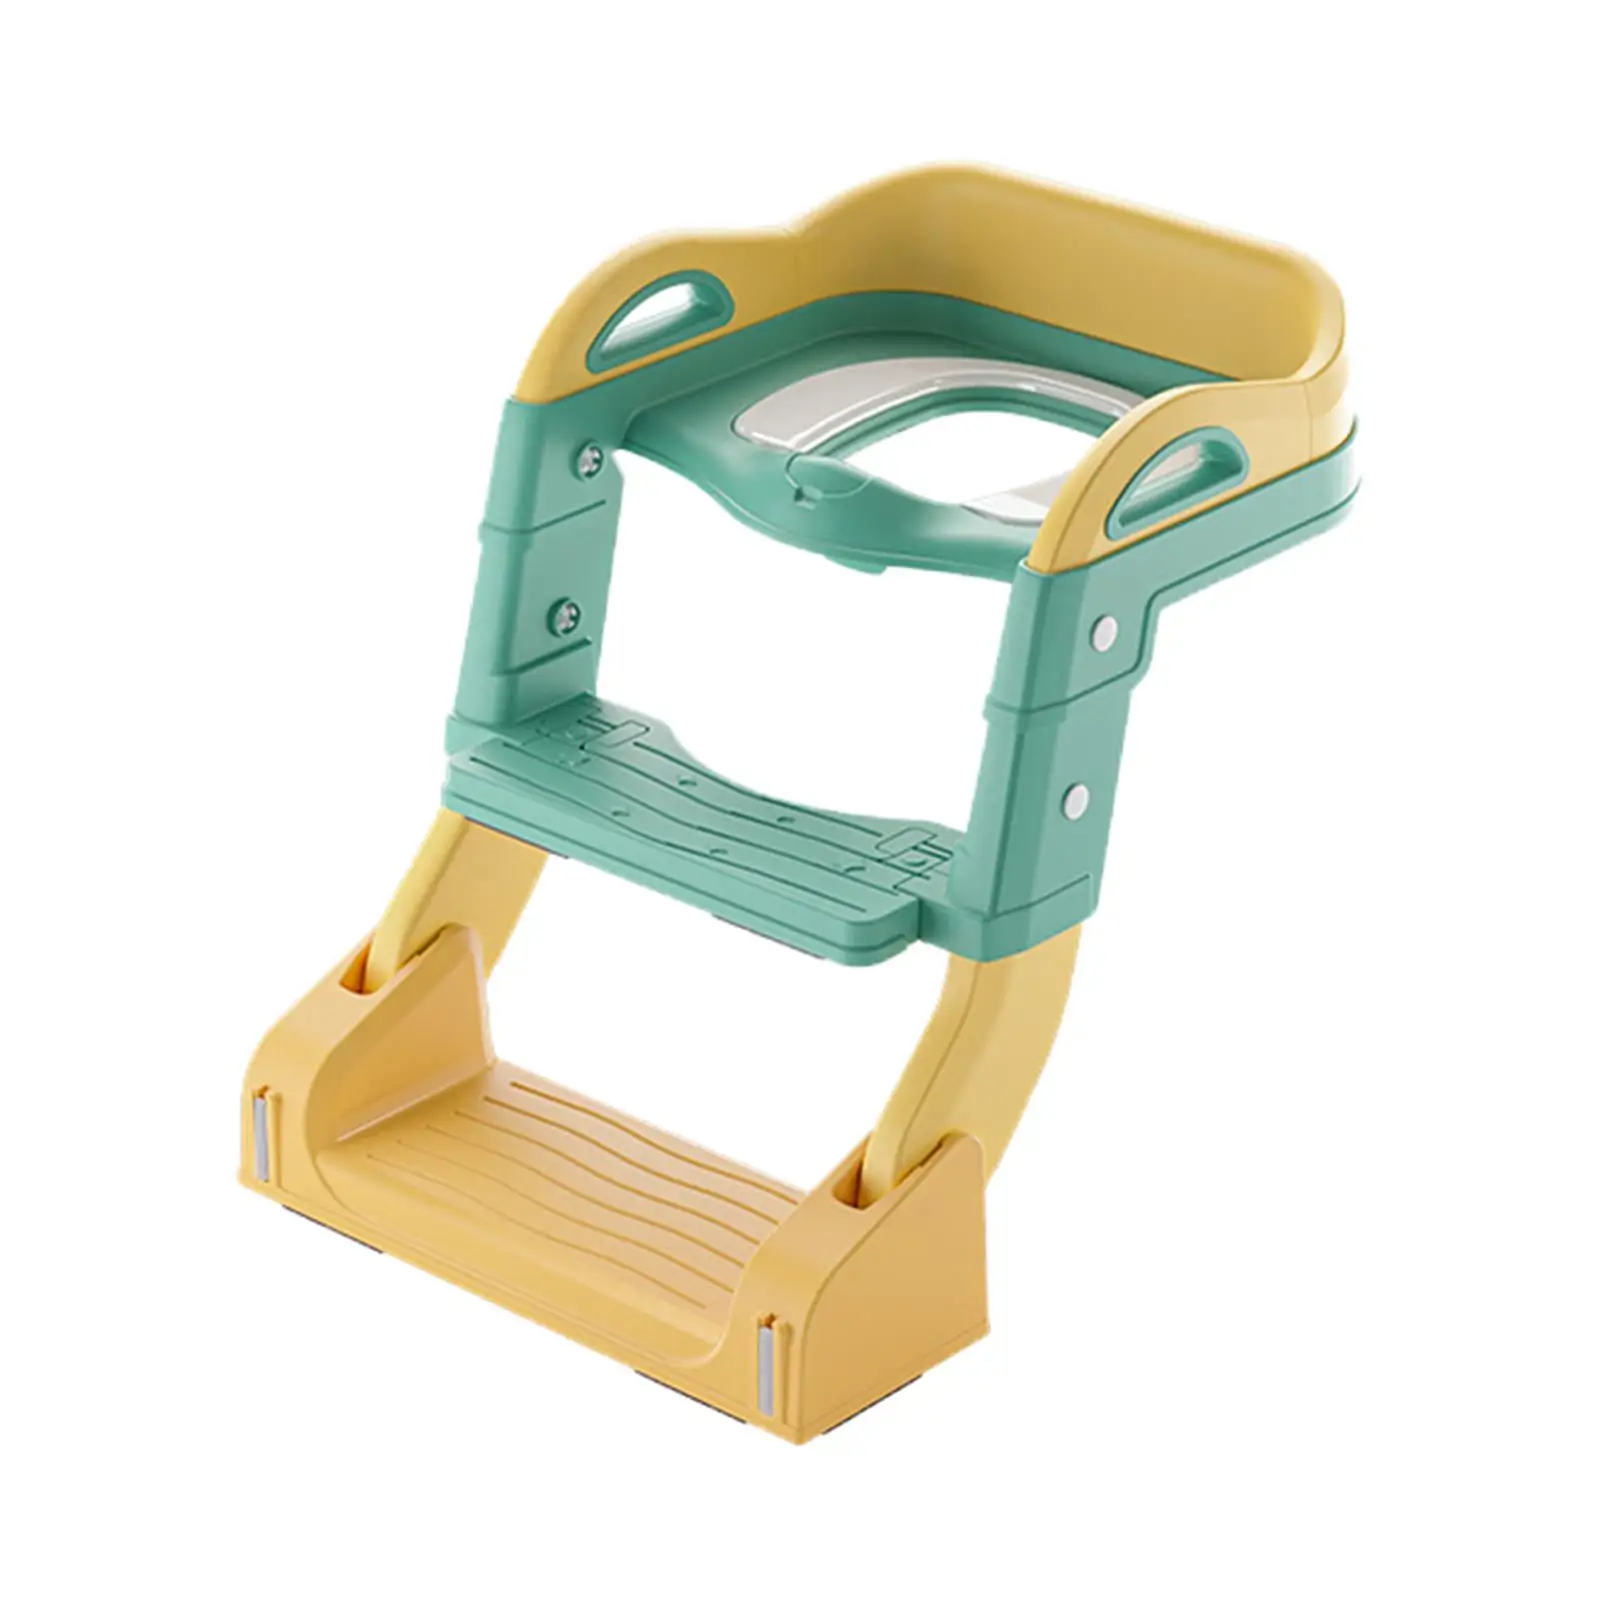 Kids Toilet Training Seat Step Stool Ladder Baby Infant Potty Soft Cushion Boy Girl Potty with Handle Child Toilet Trainer Seat